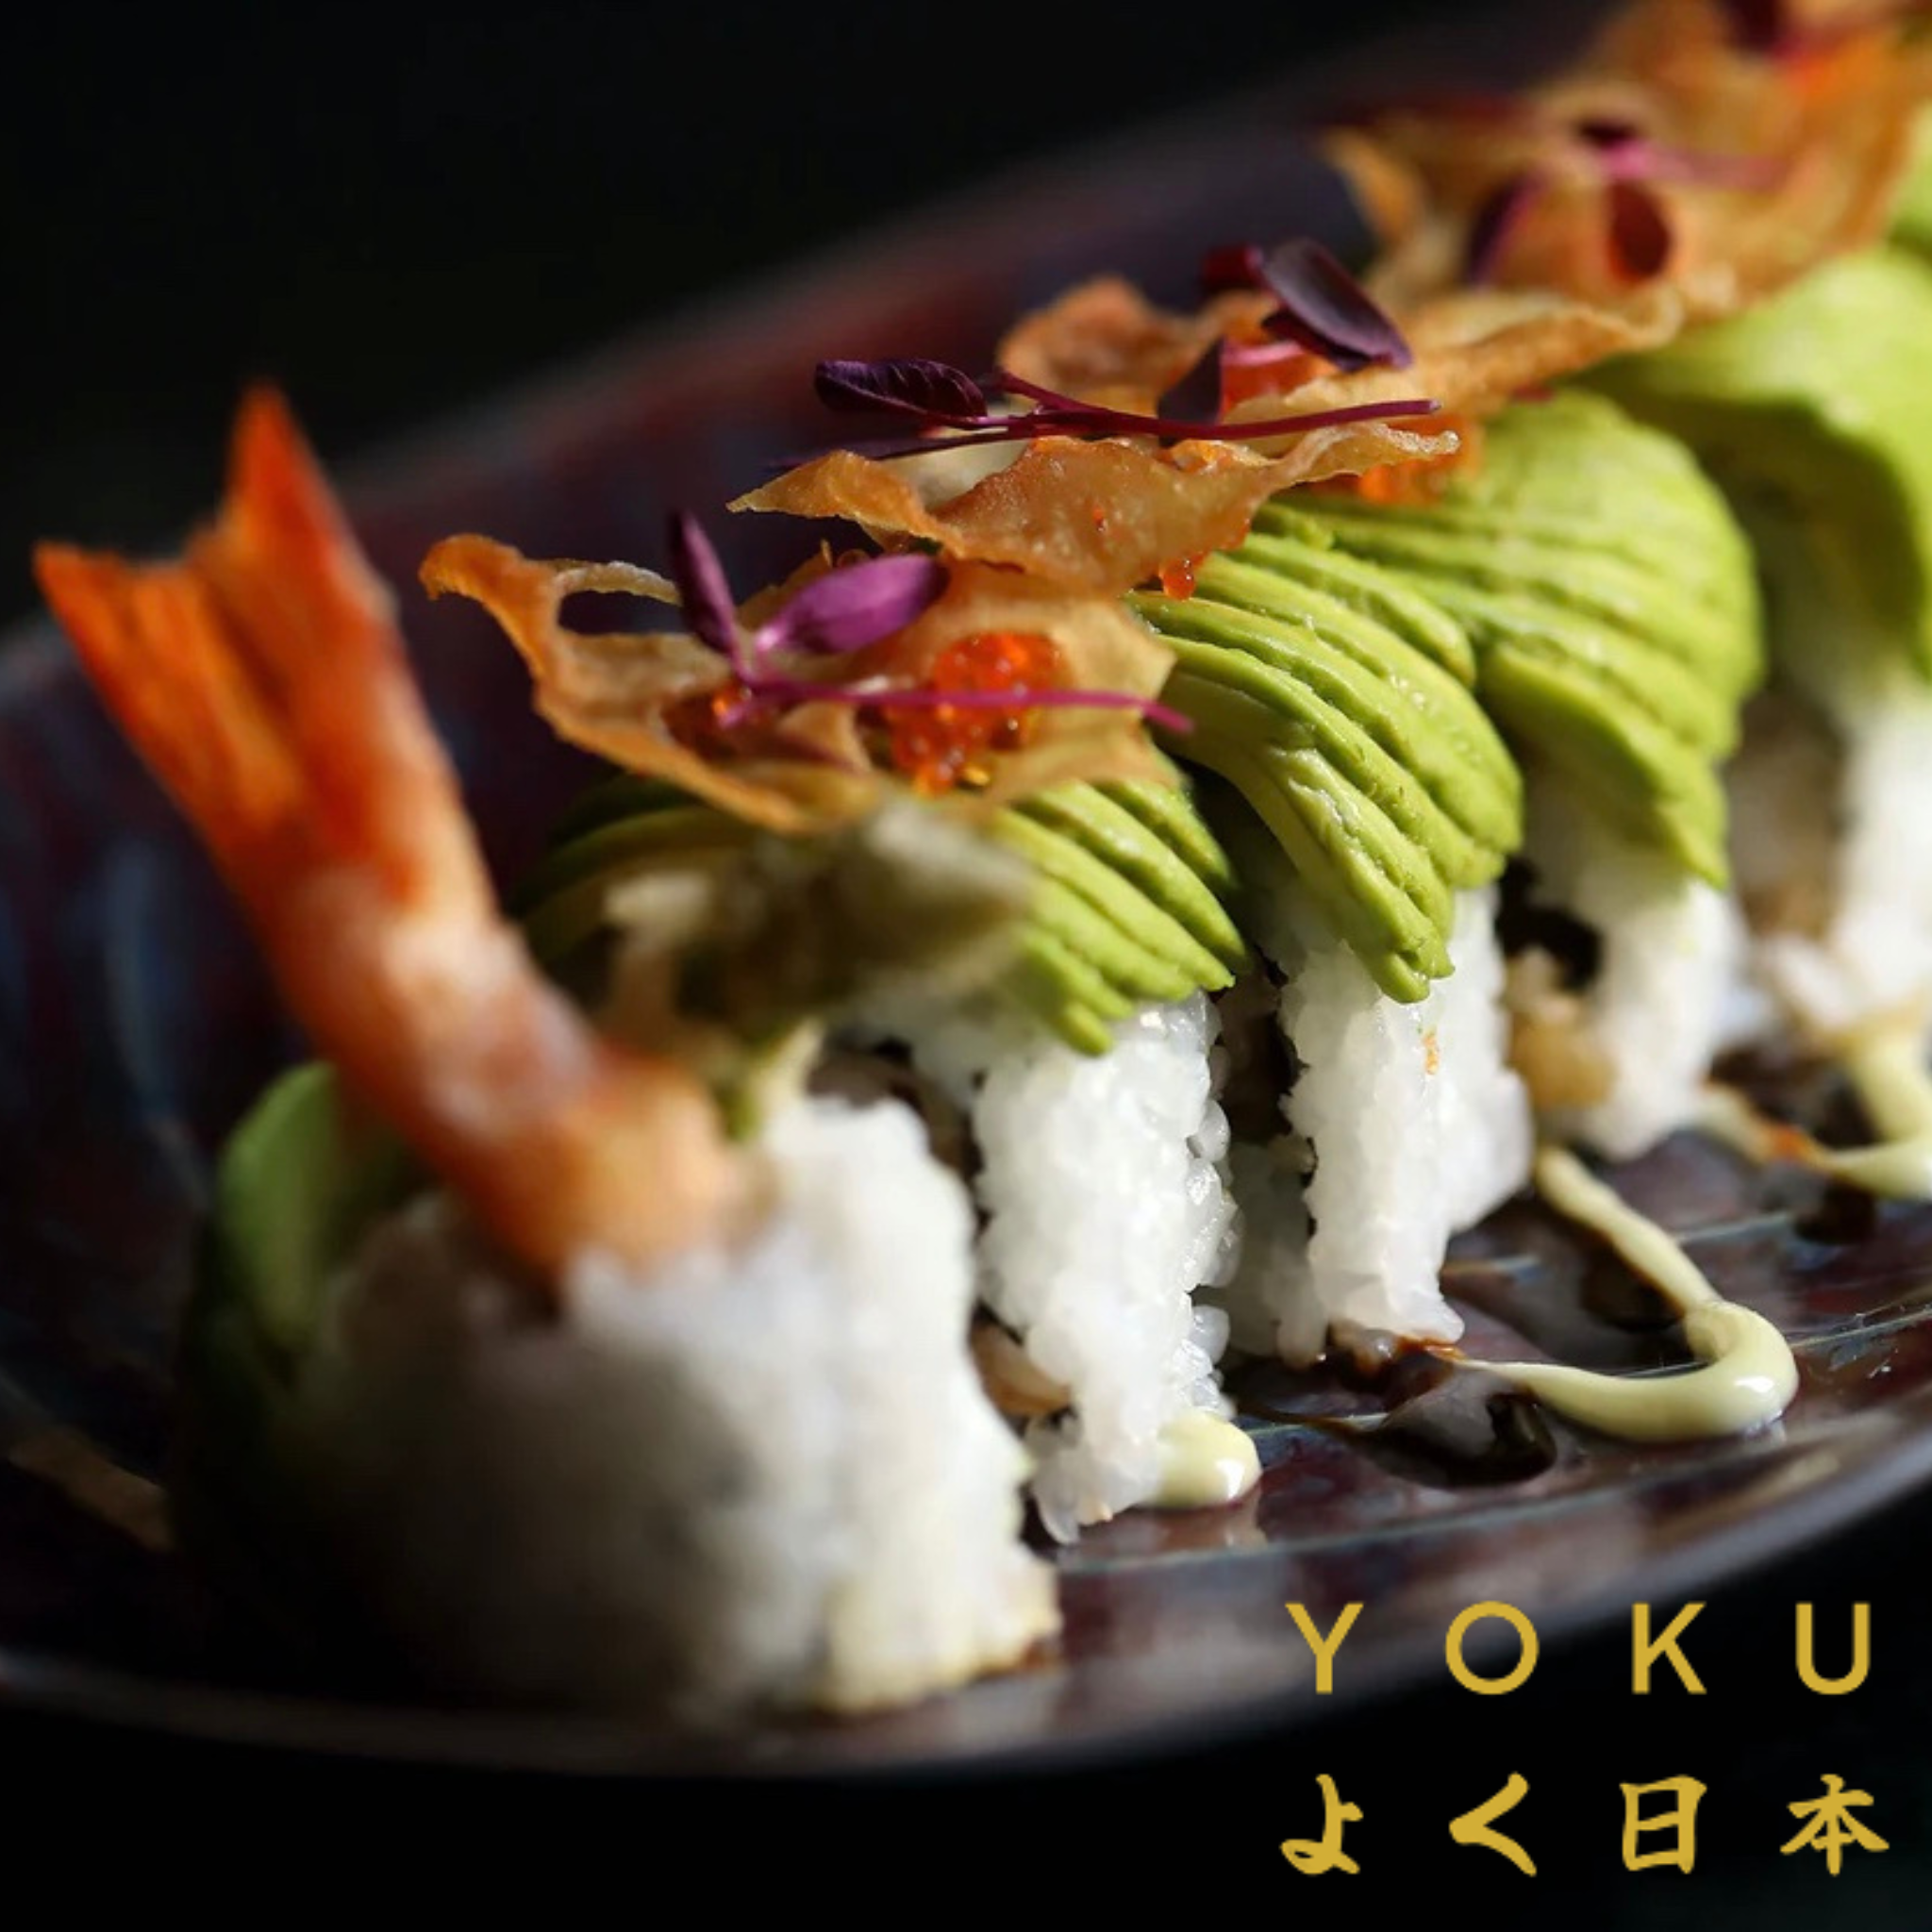 Yoku - The Tokyo-Vogue Japanese Sushi and Asian Dining Experience